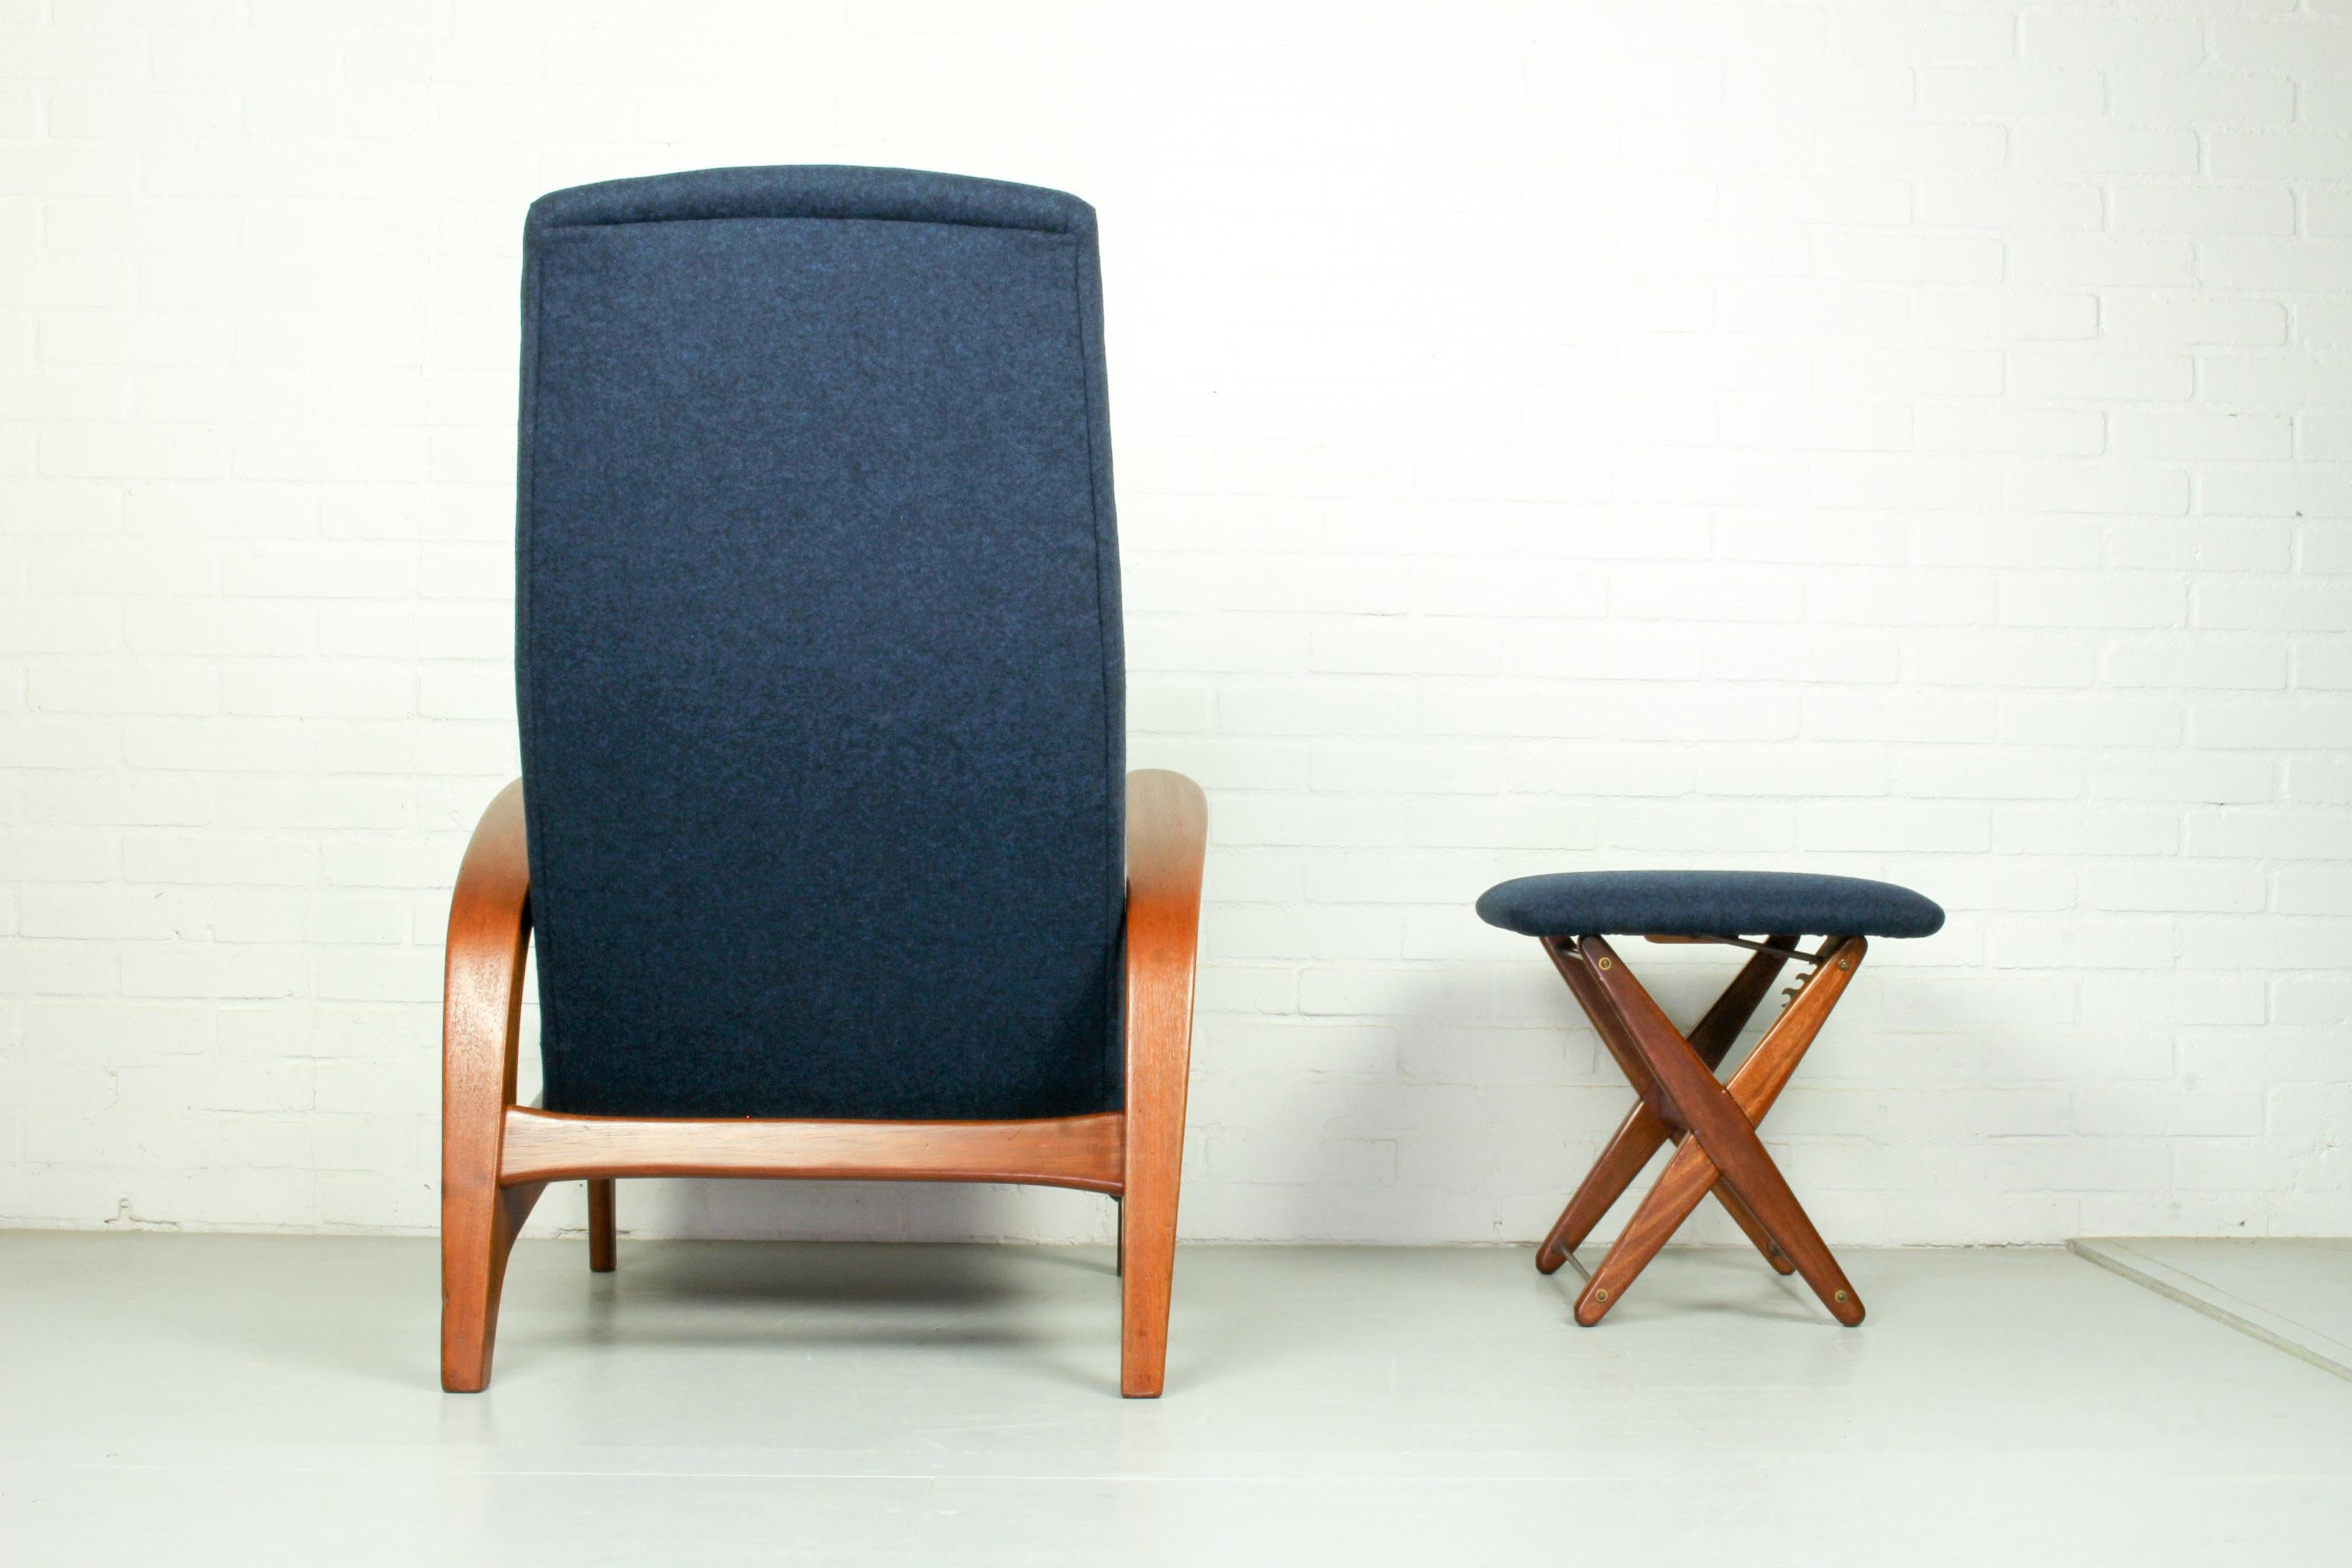 Mid-Century Modern Rock n Rest Lounge Chair and Foot Stool by Gimson & Slater, circa 1960